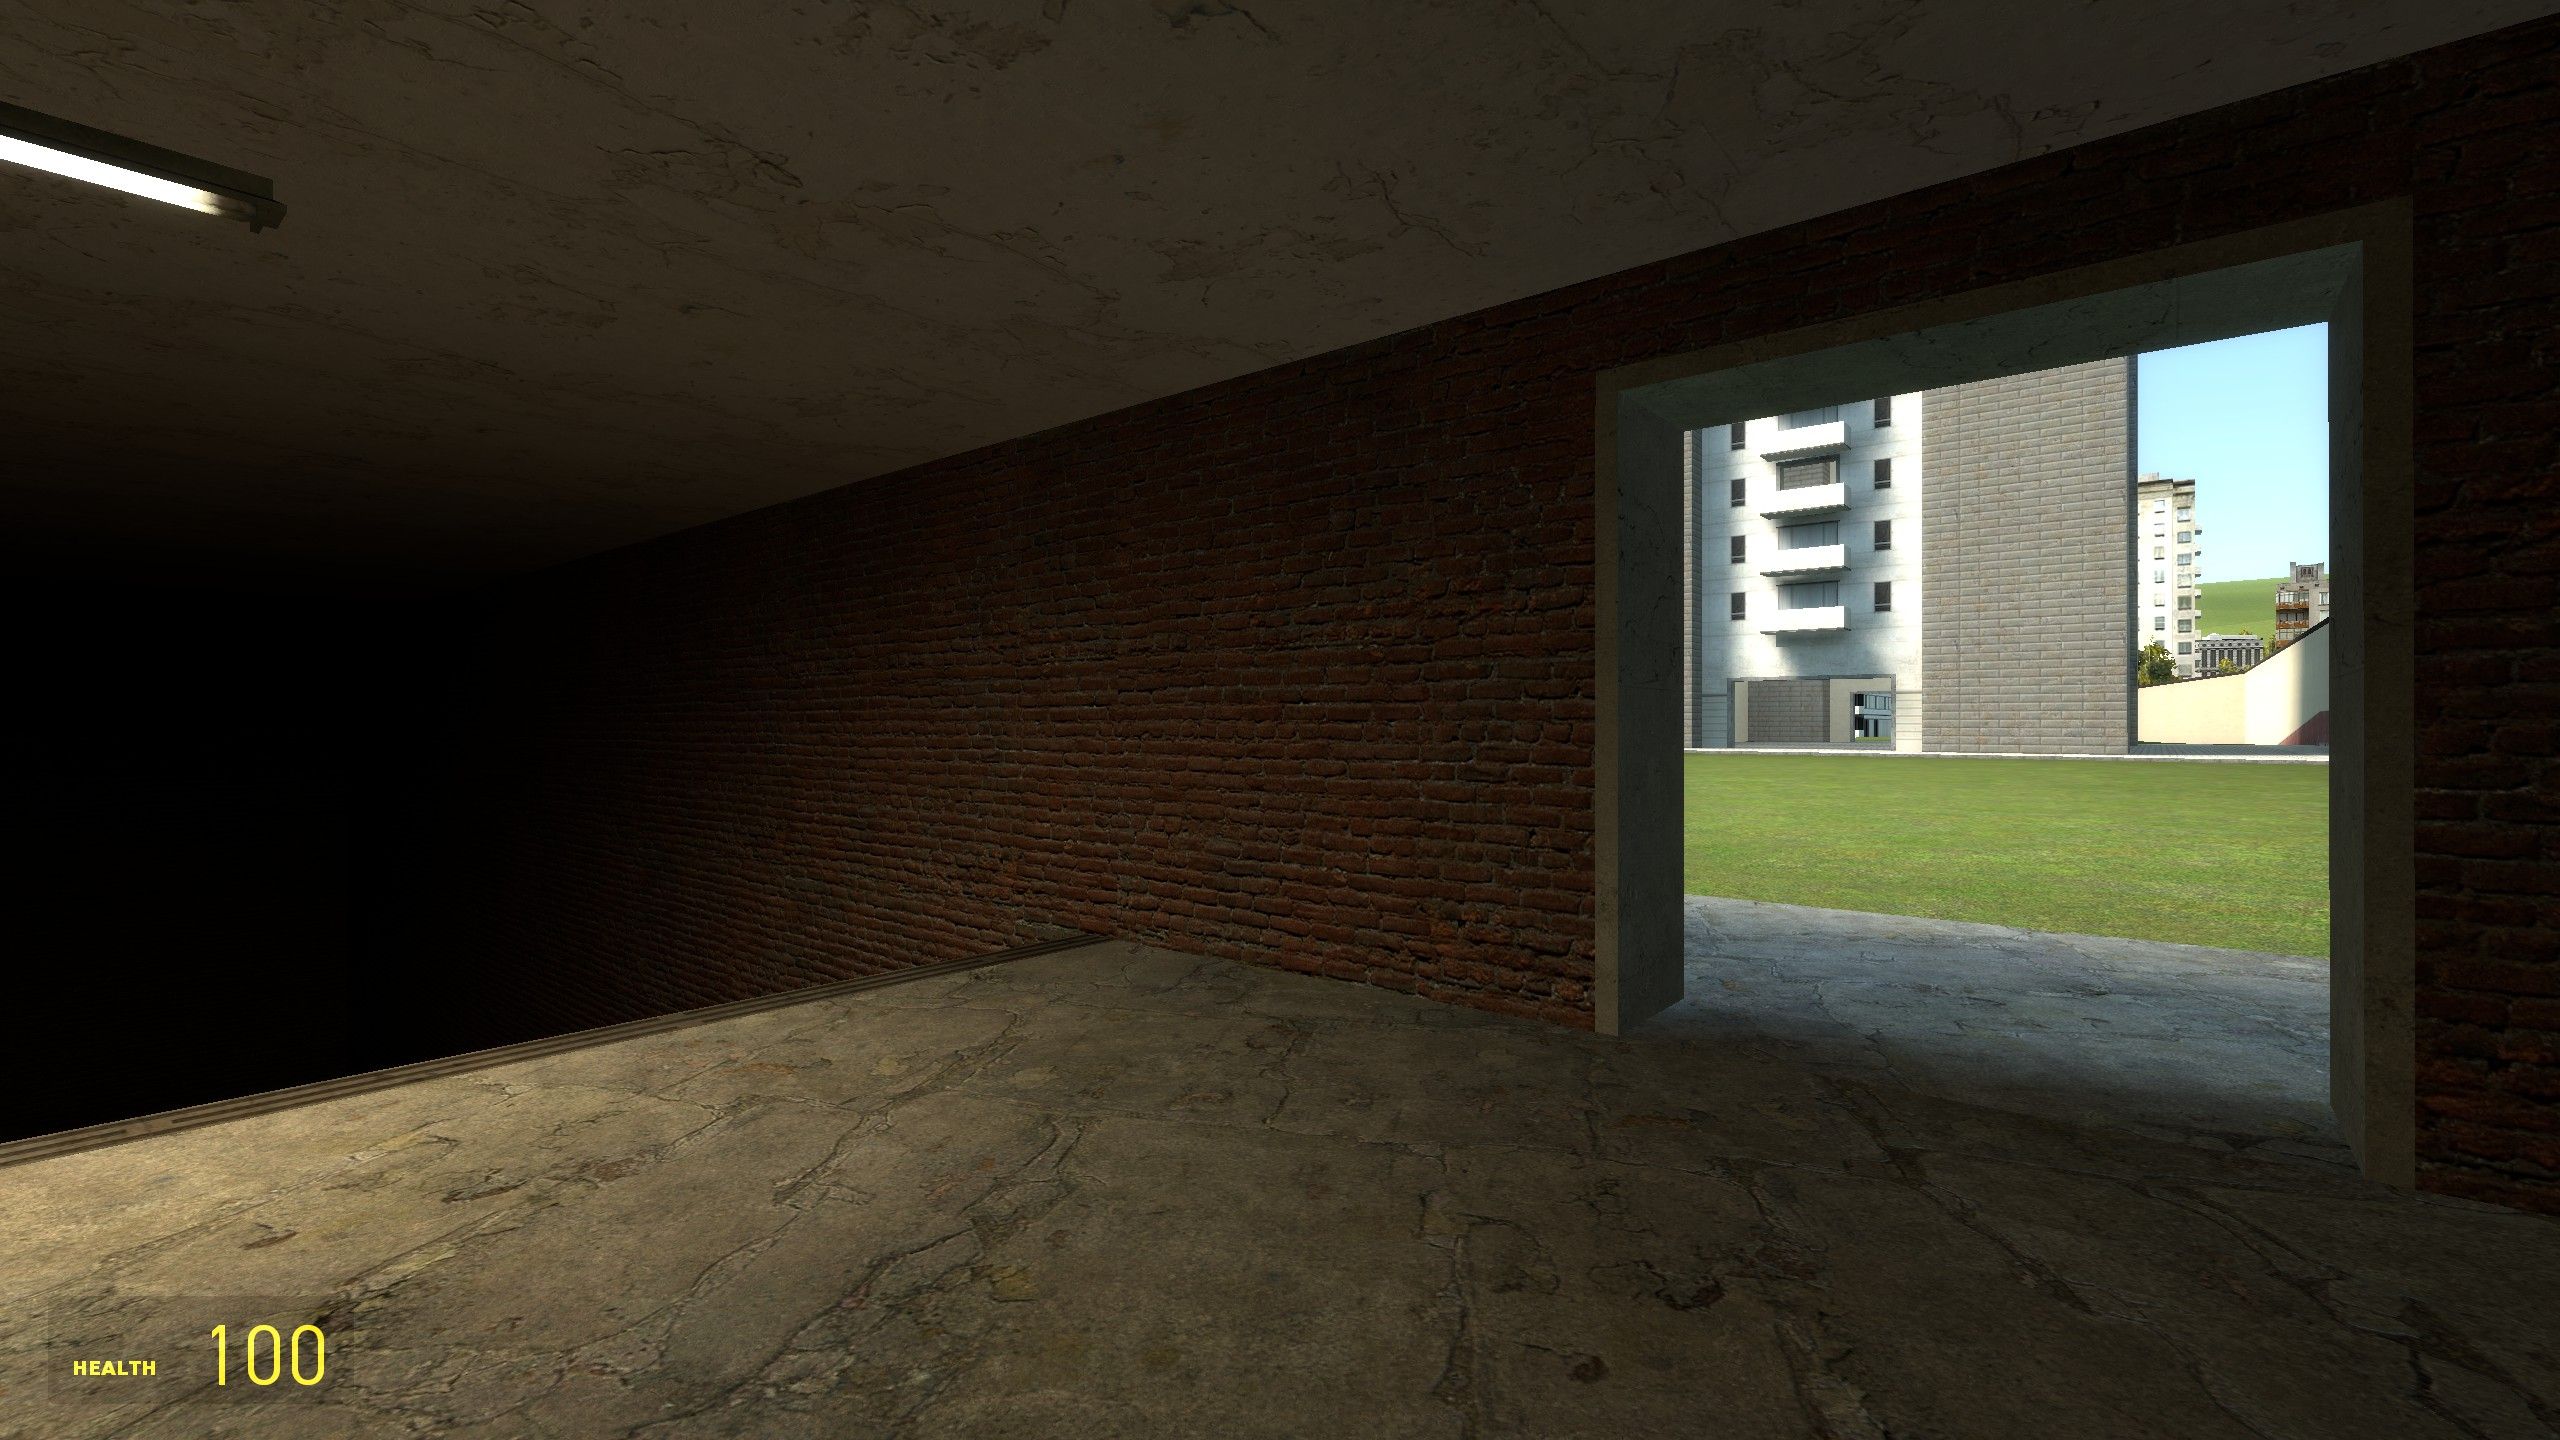 Gmod is basically liminal space, the game: LiminalSpace